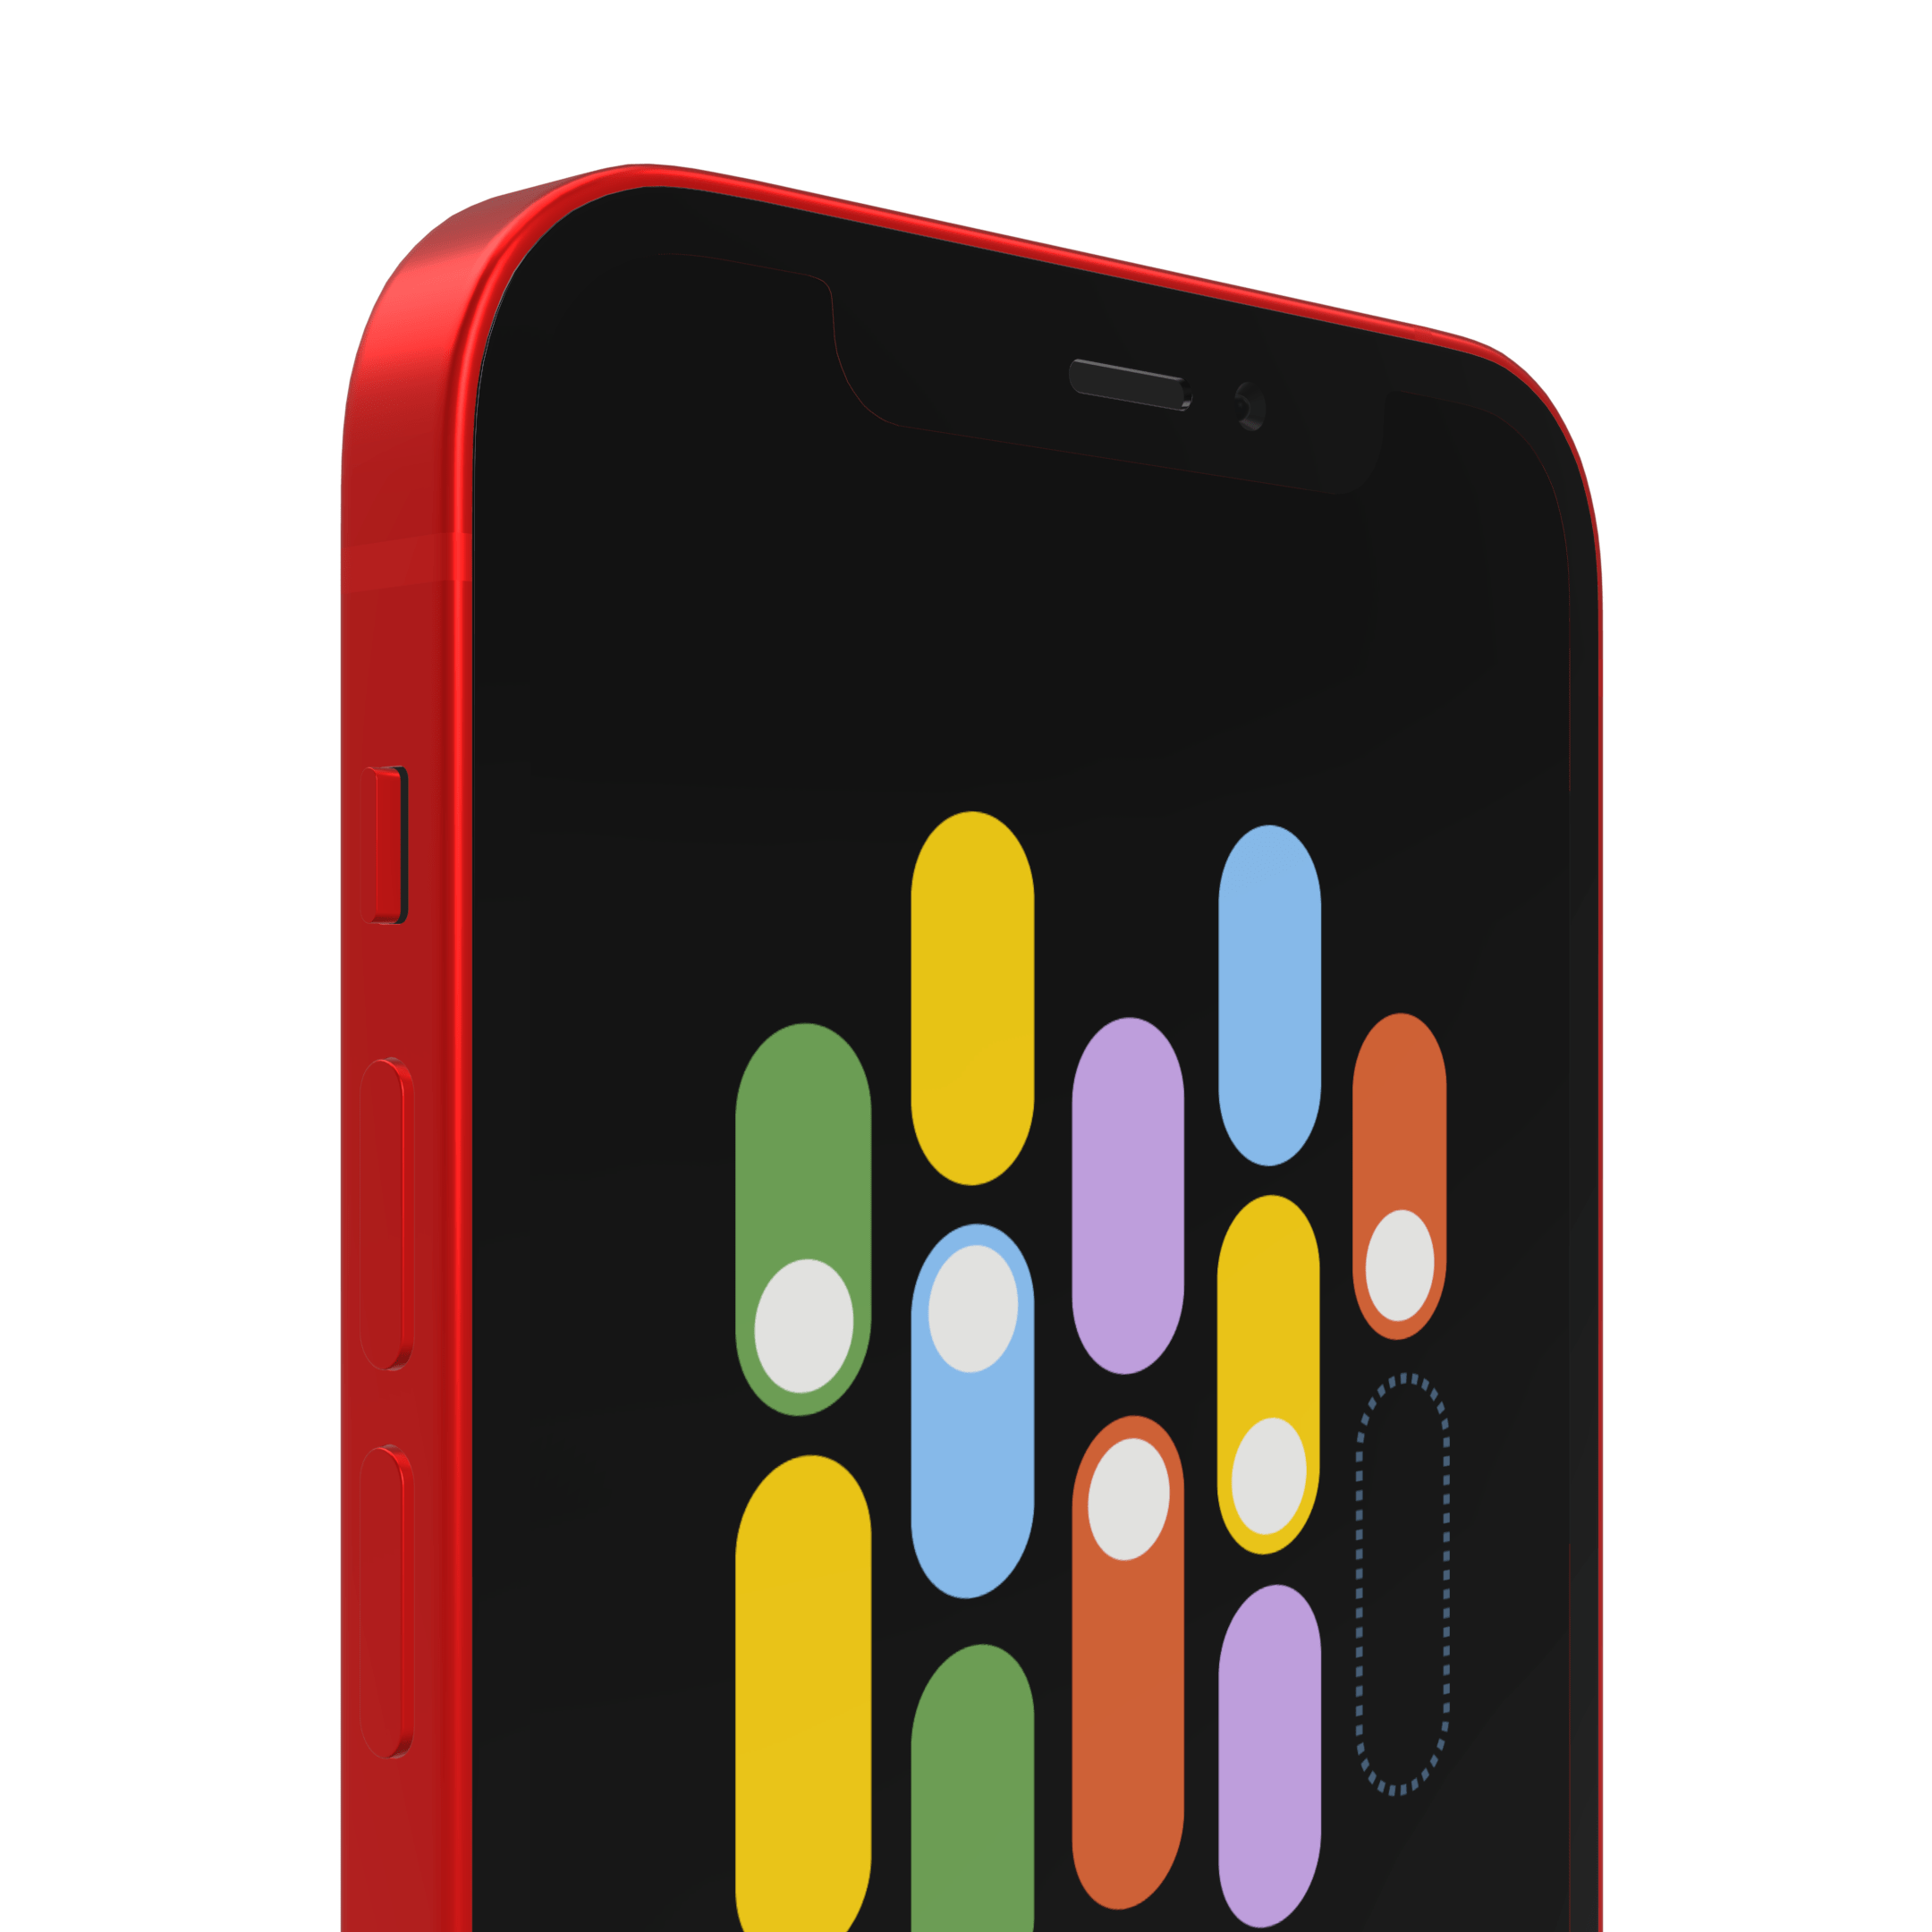 Red iPhone with black UI design on the screen